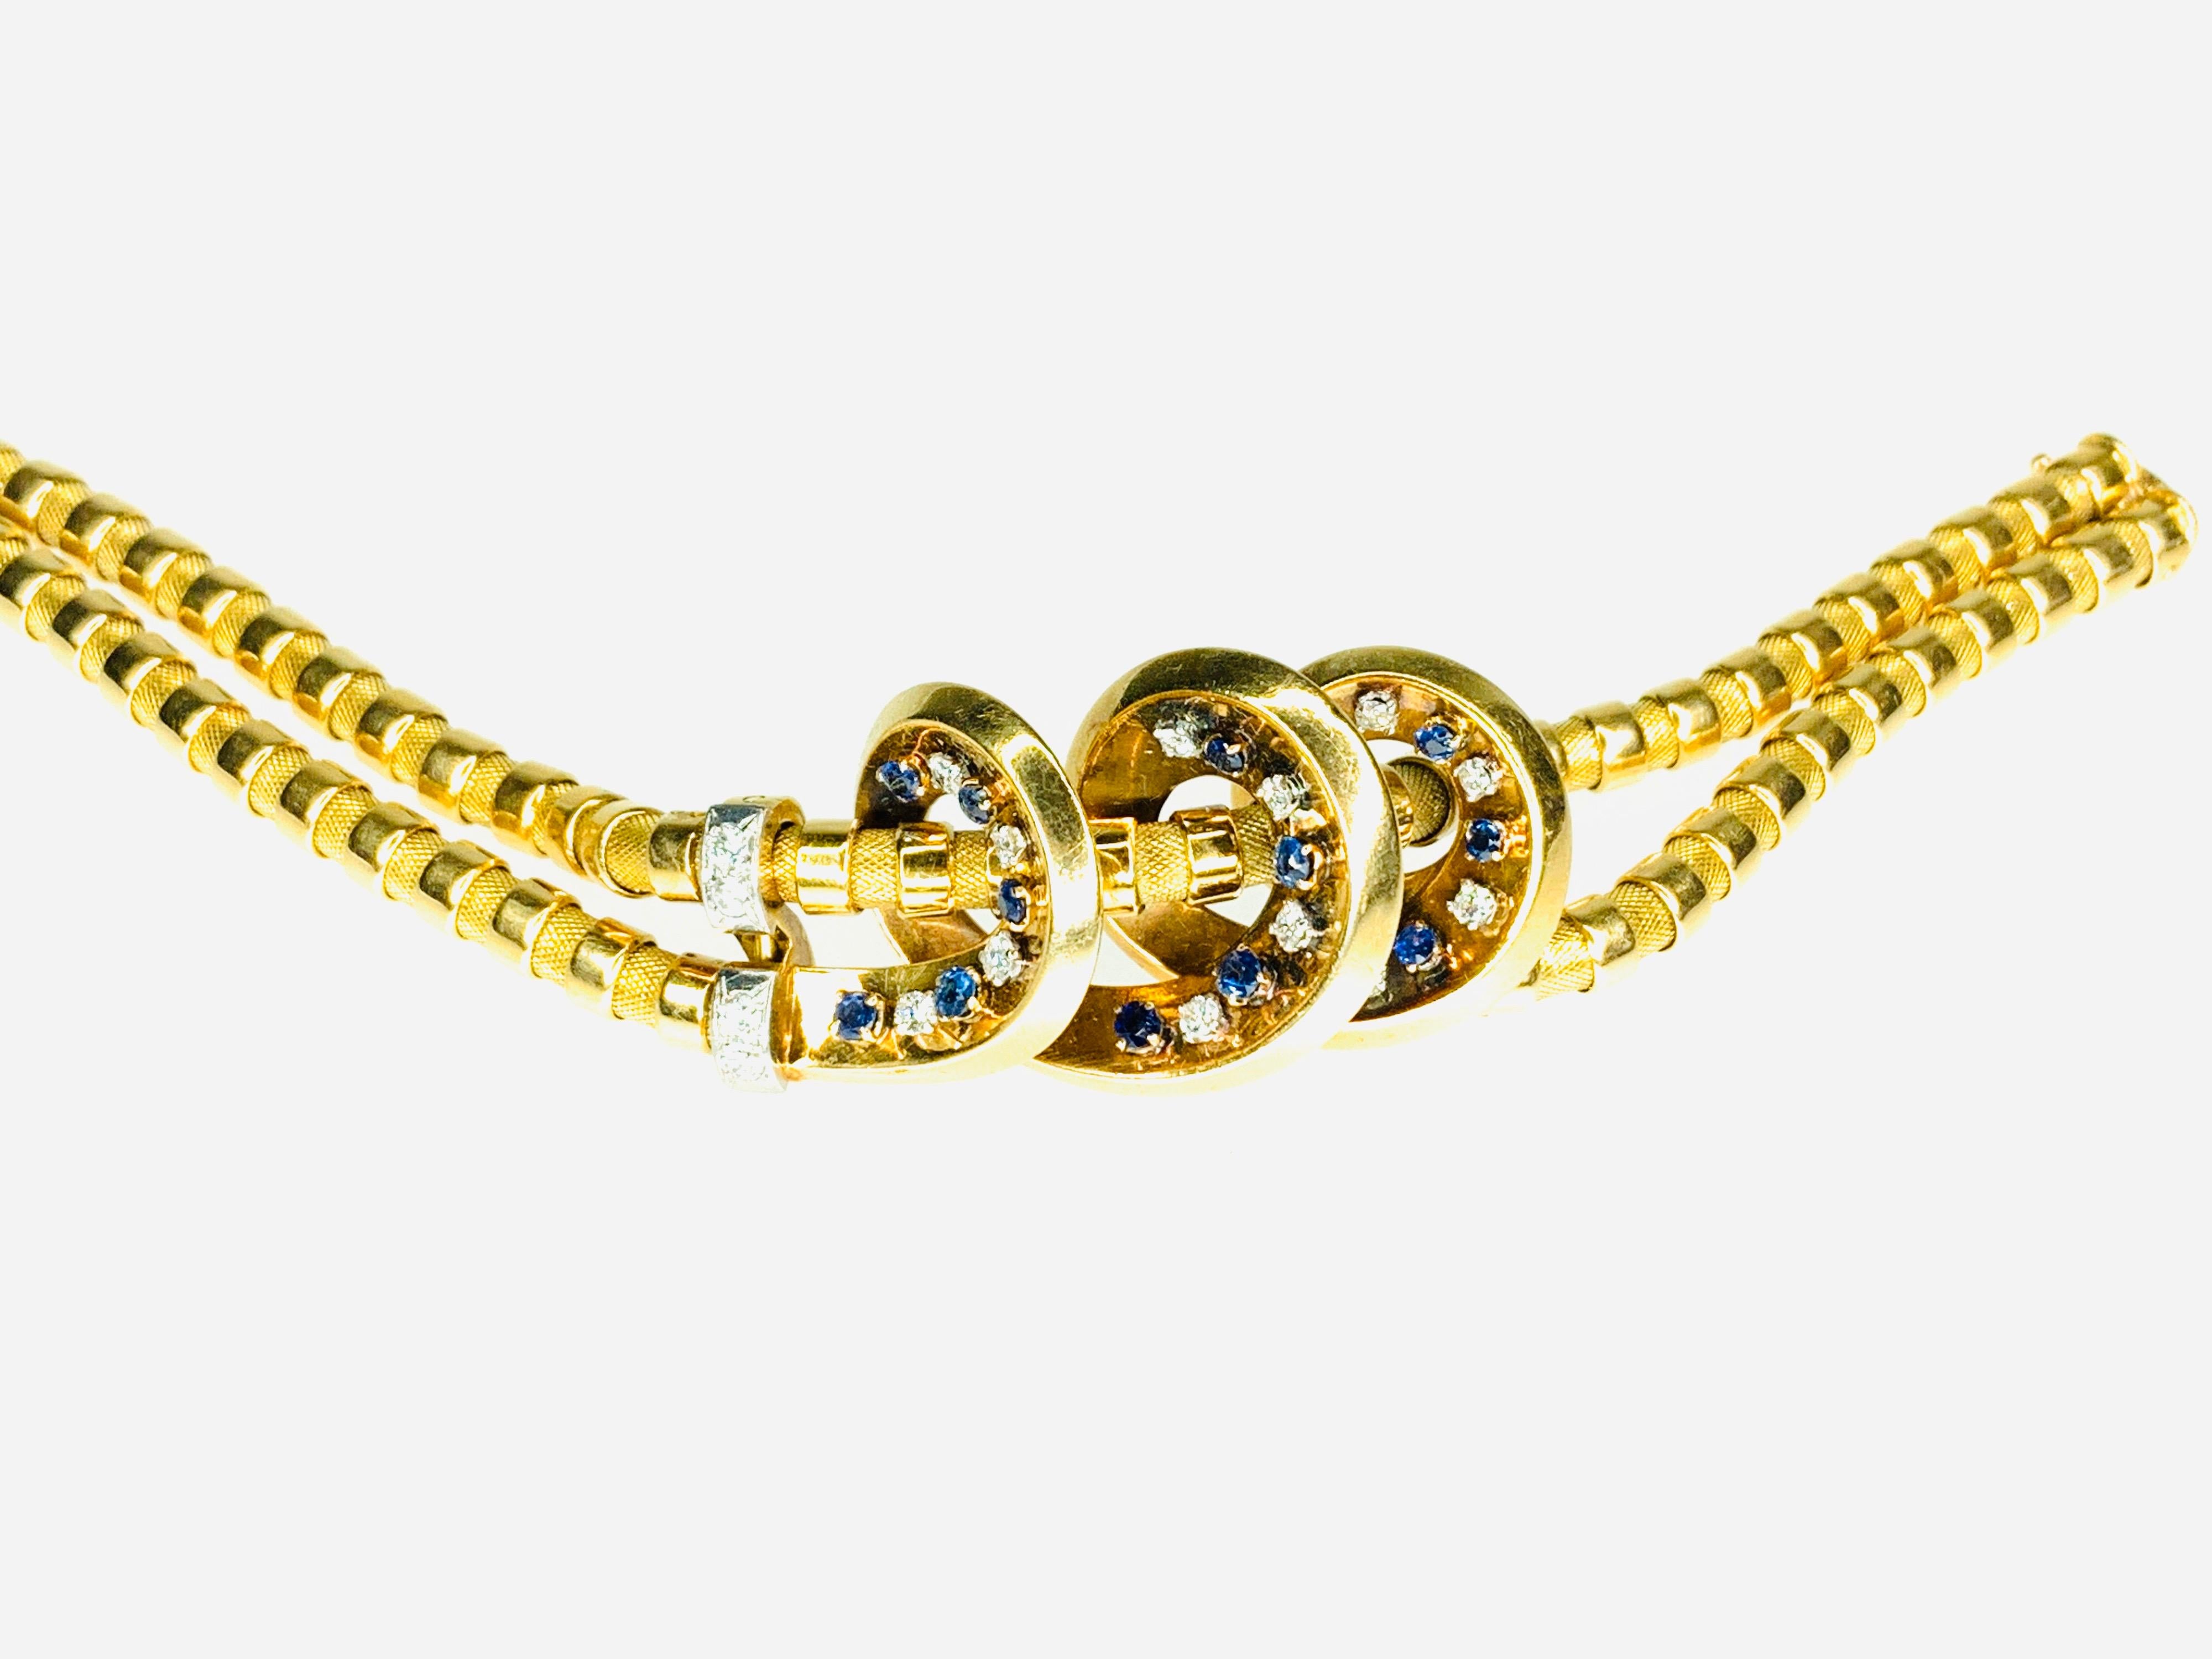 Gemolithos, Retro Sapphire and diamond bracelet, by Lacloche Fres, 1940s. Gold 18K ilustrated on the book 